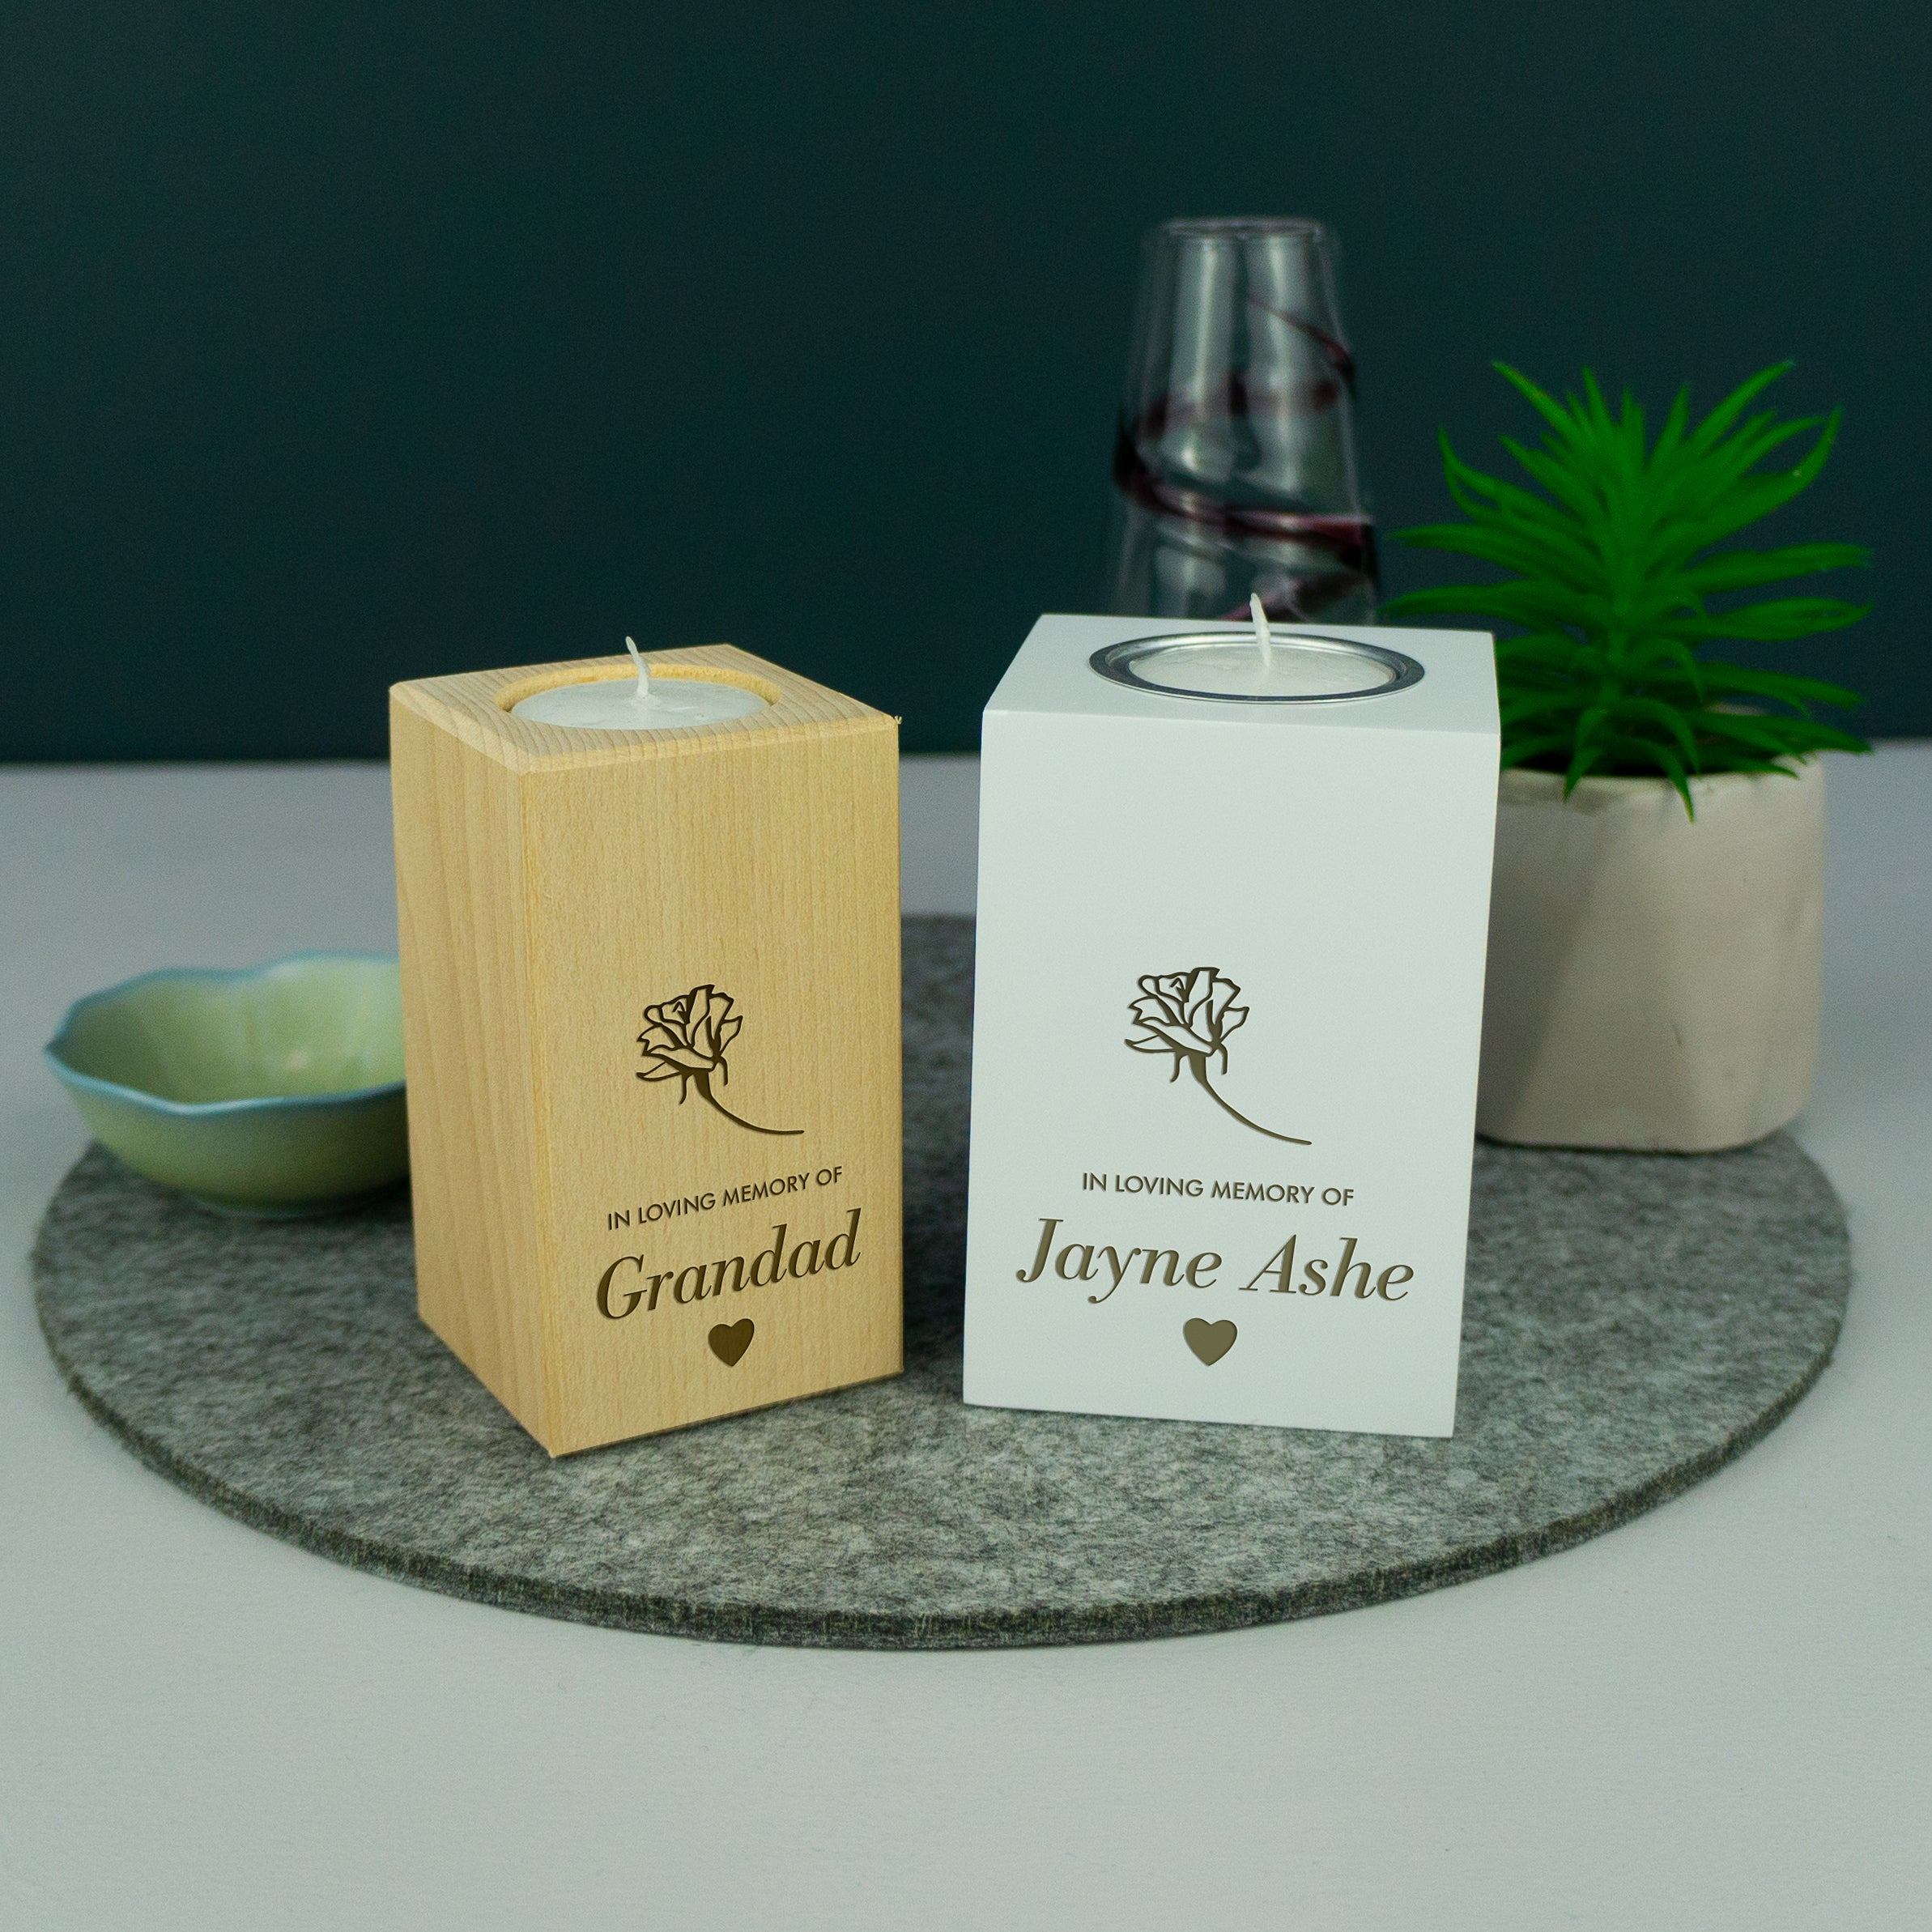 Personalised wooden memorial candle holder